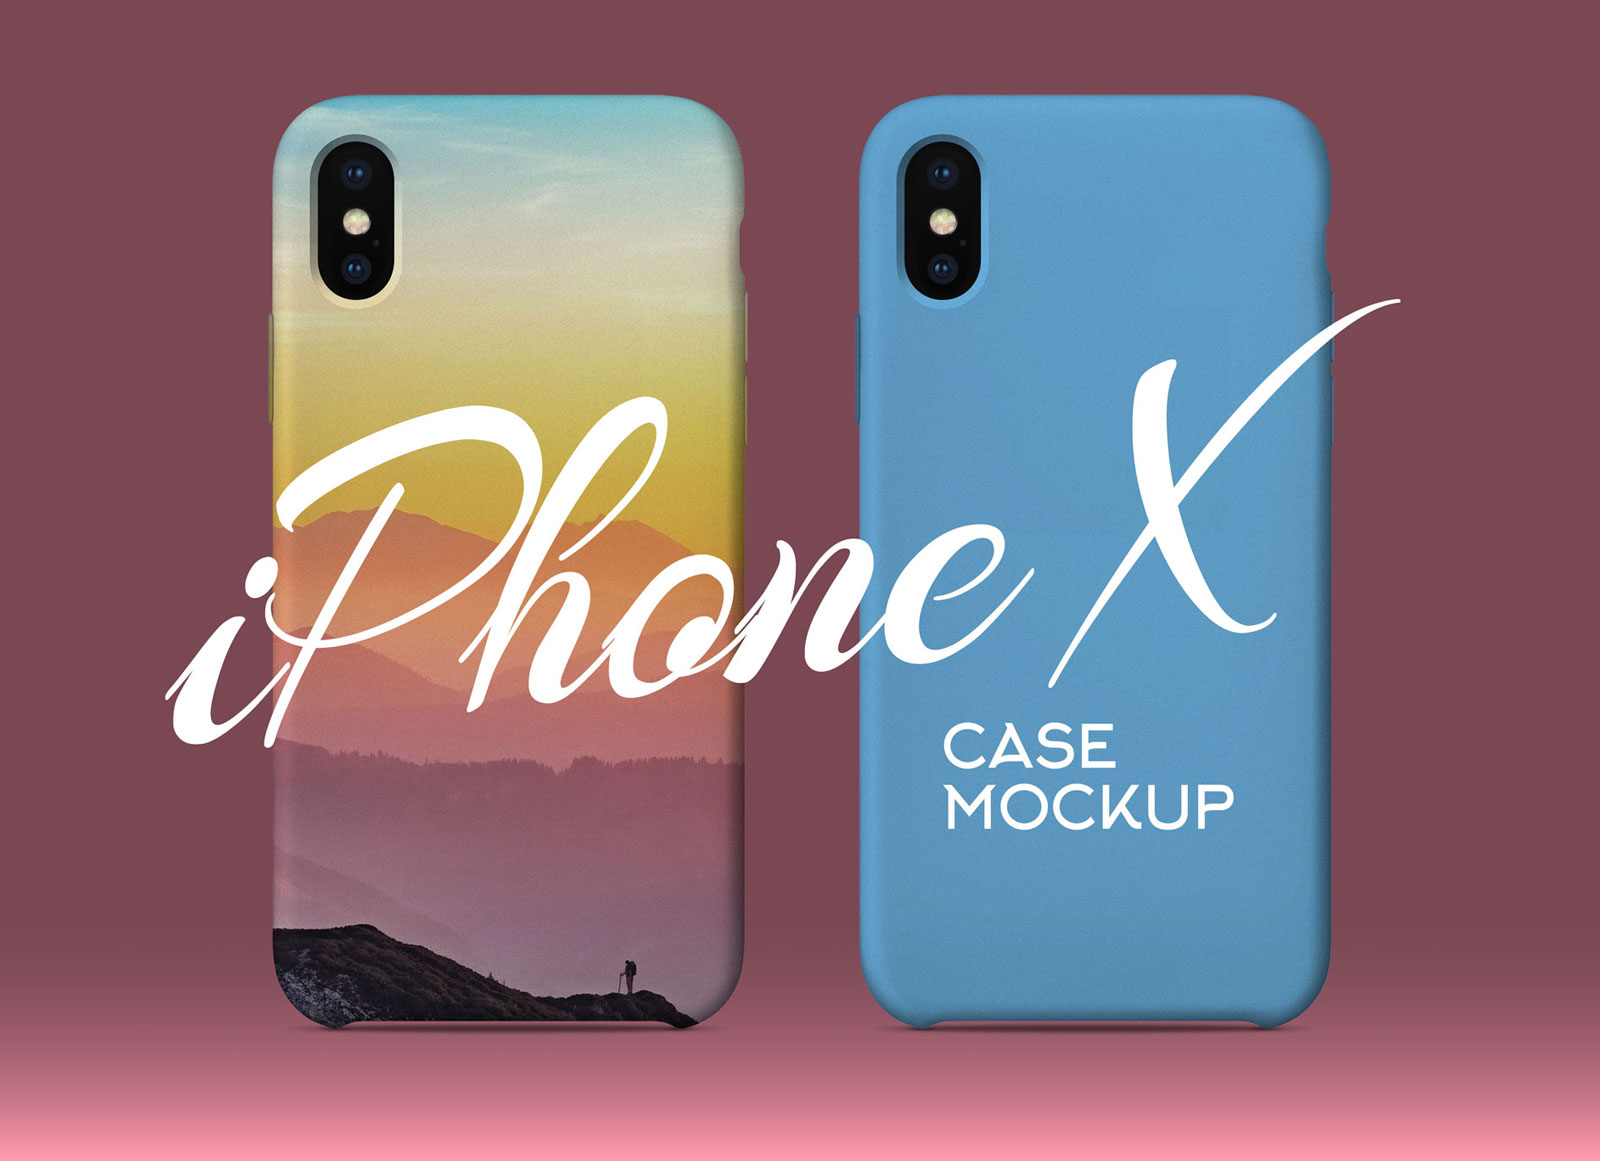 Download Free iPhone X Silicon Case Back Cover Mockup PSD - Good Mockups